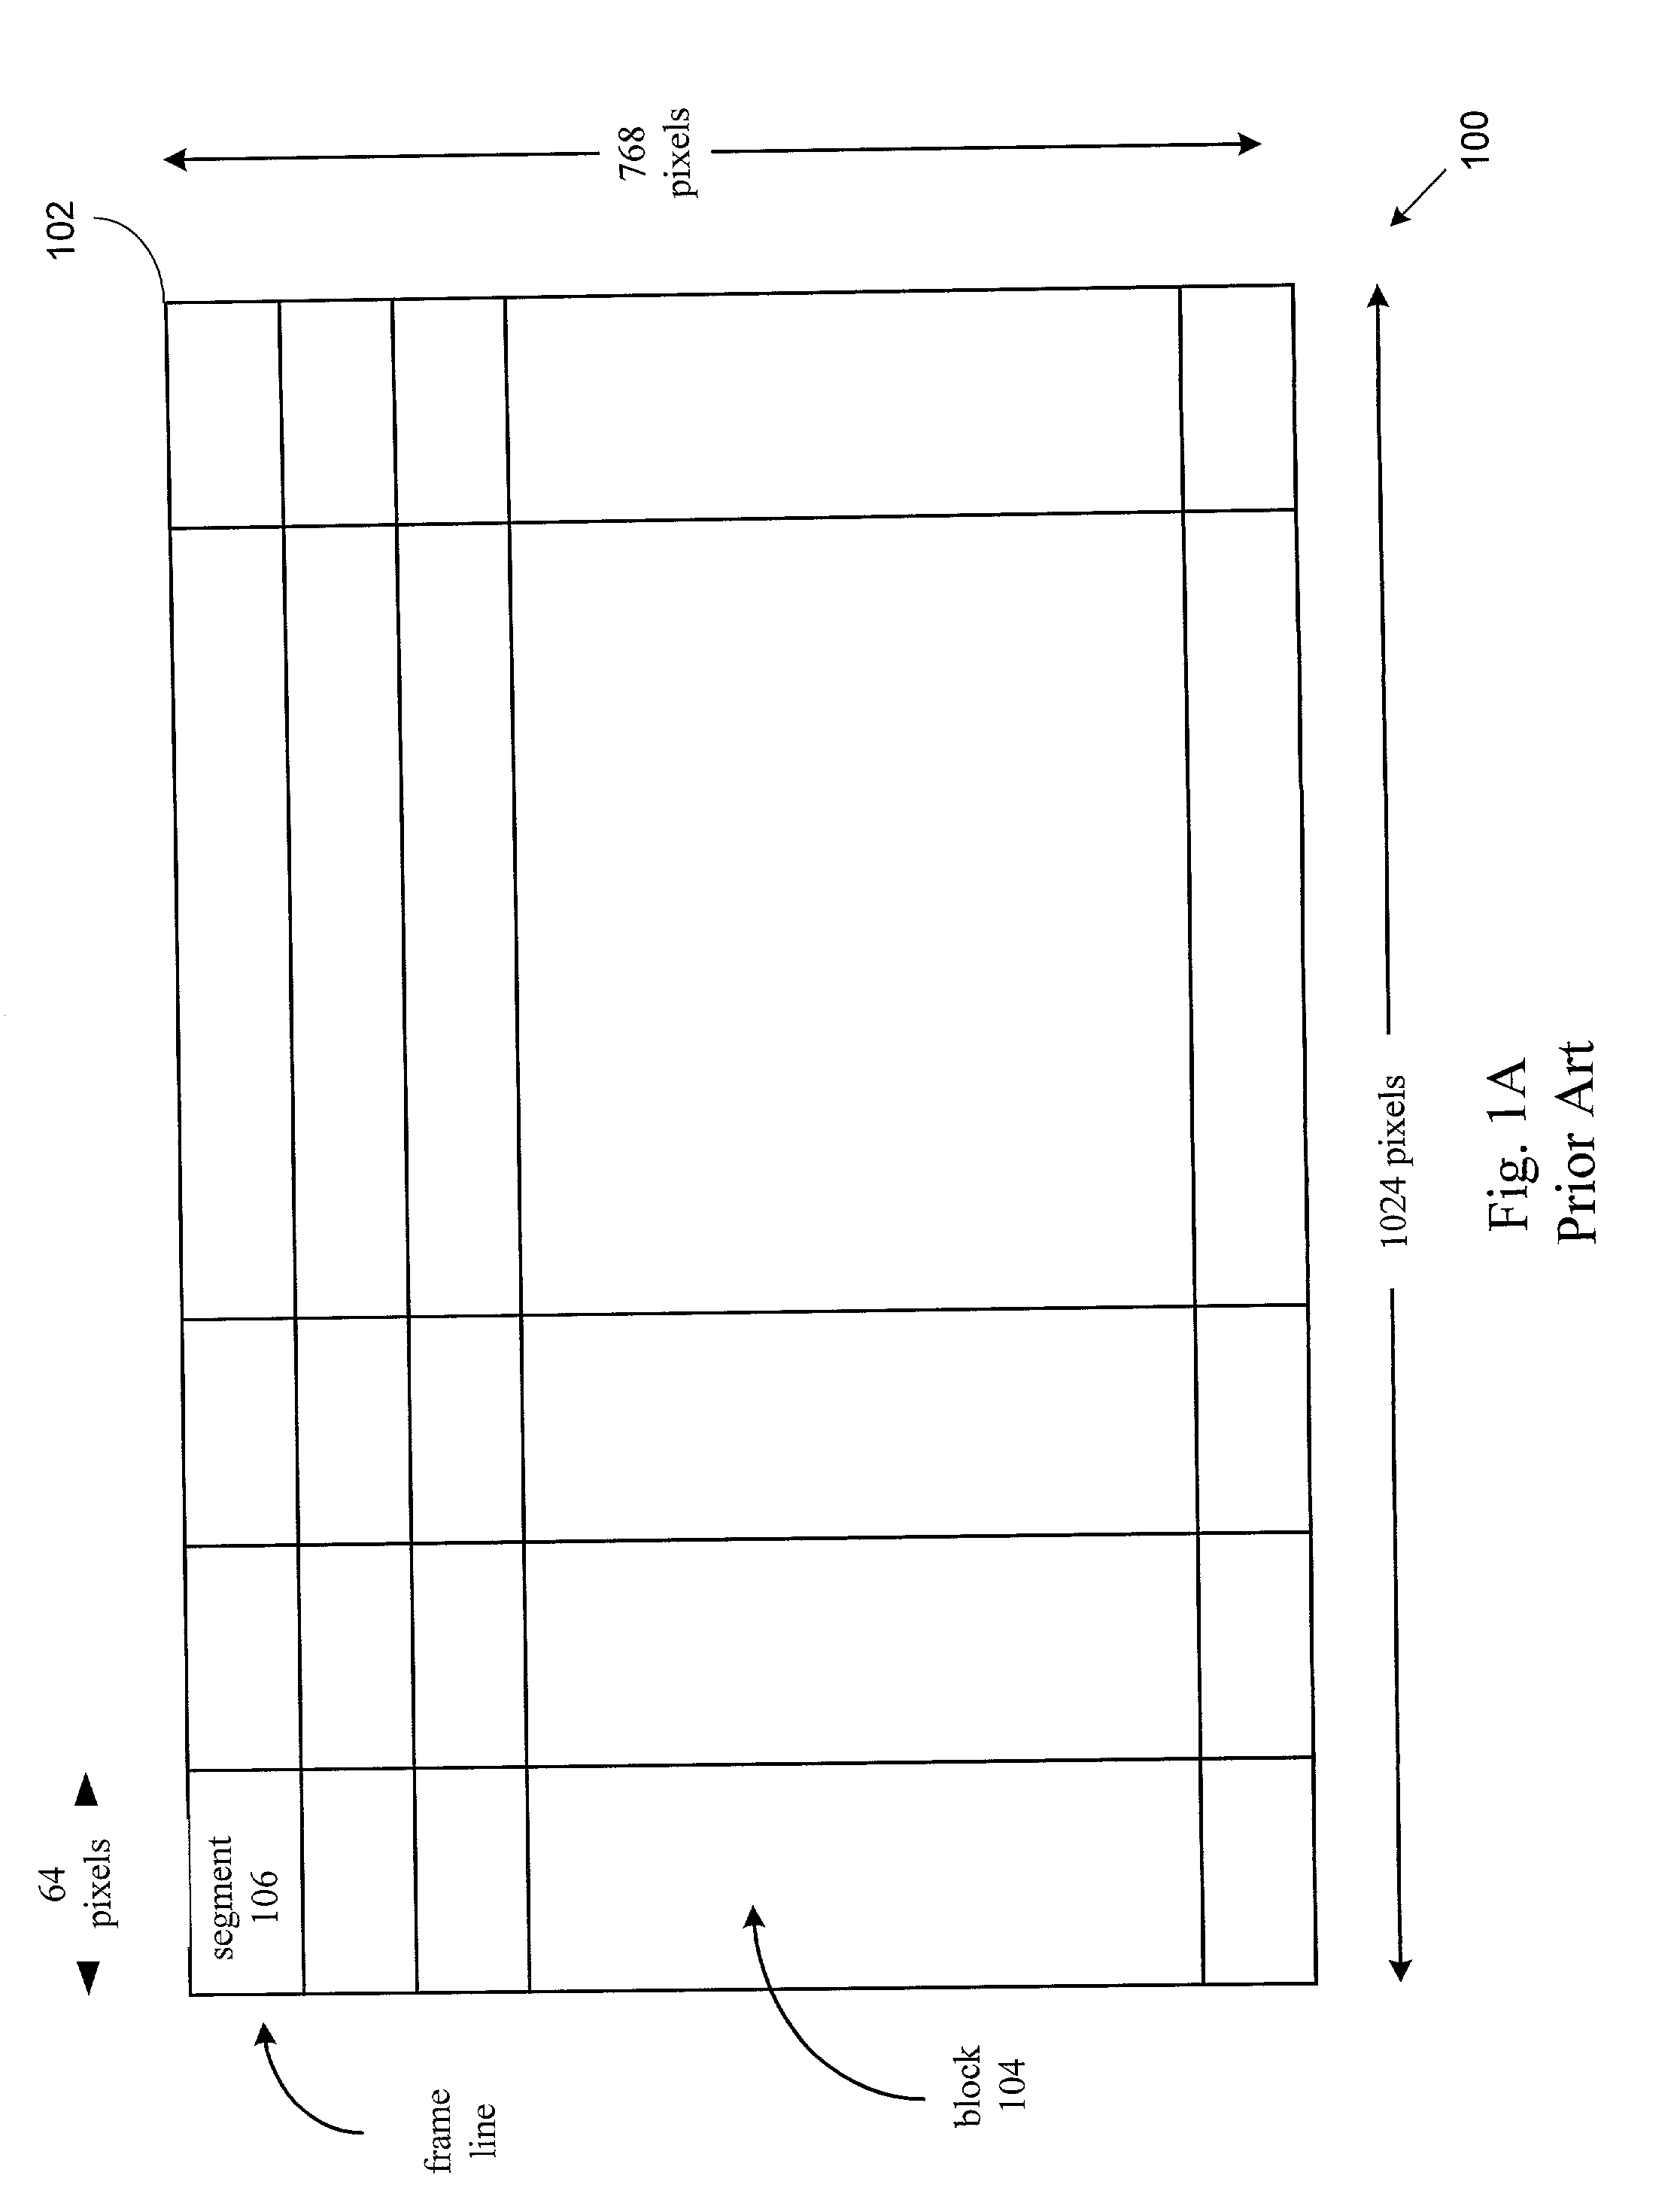 Method and apparatus for detecting flicker in an LCD image